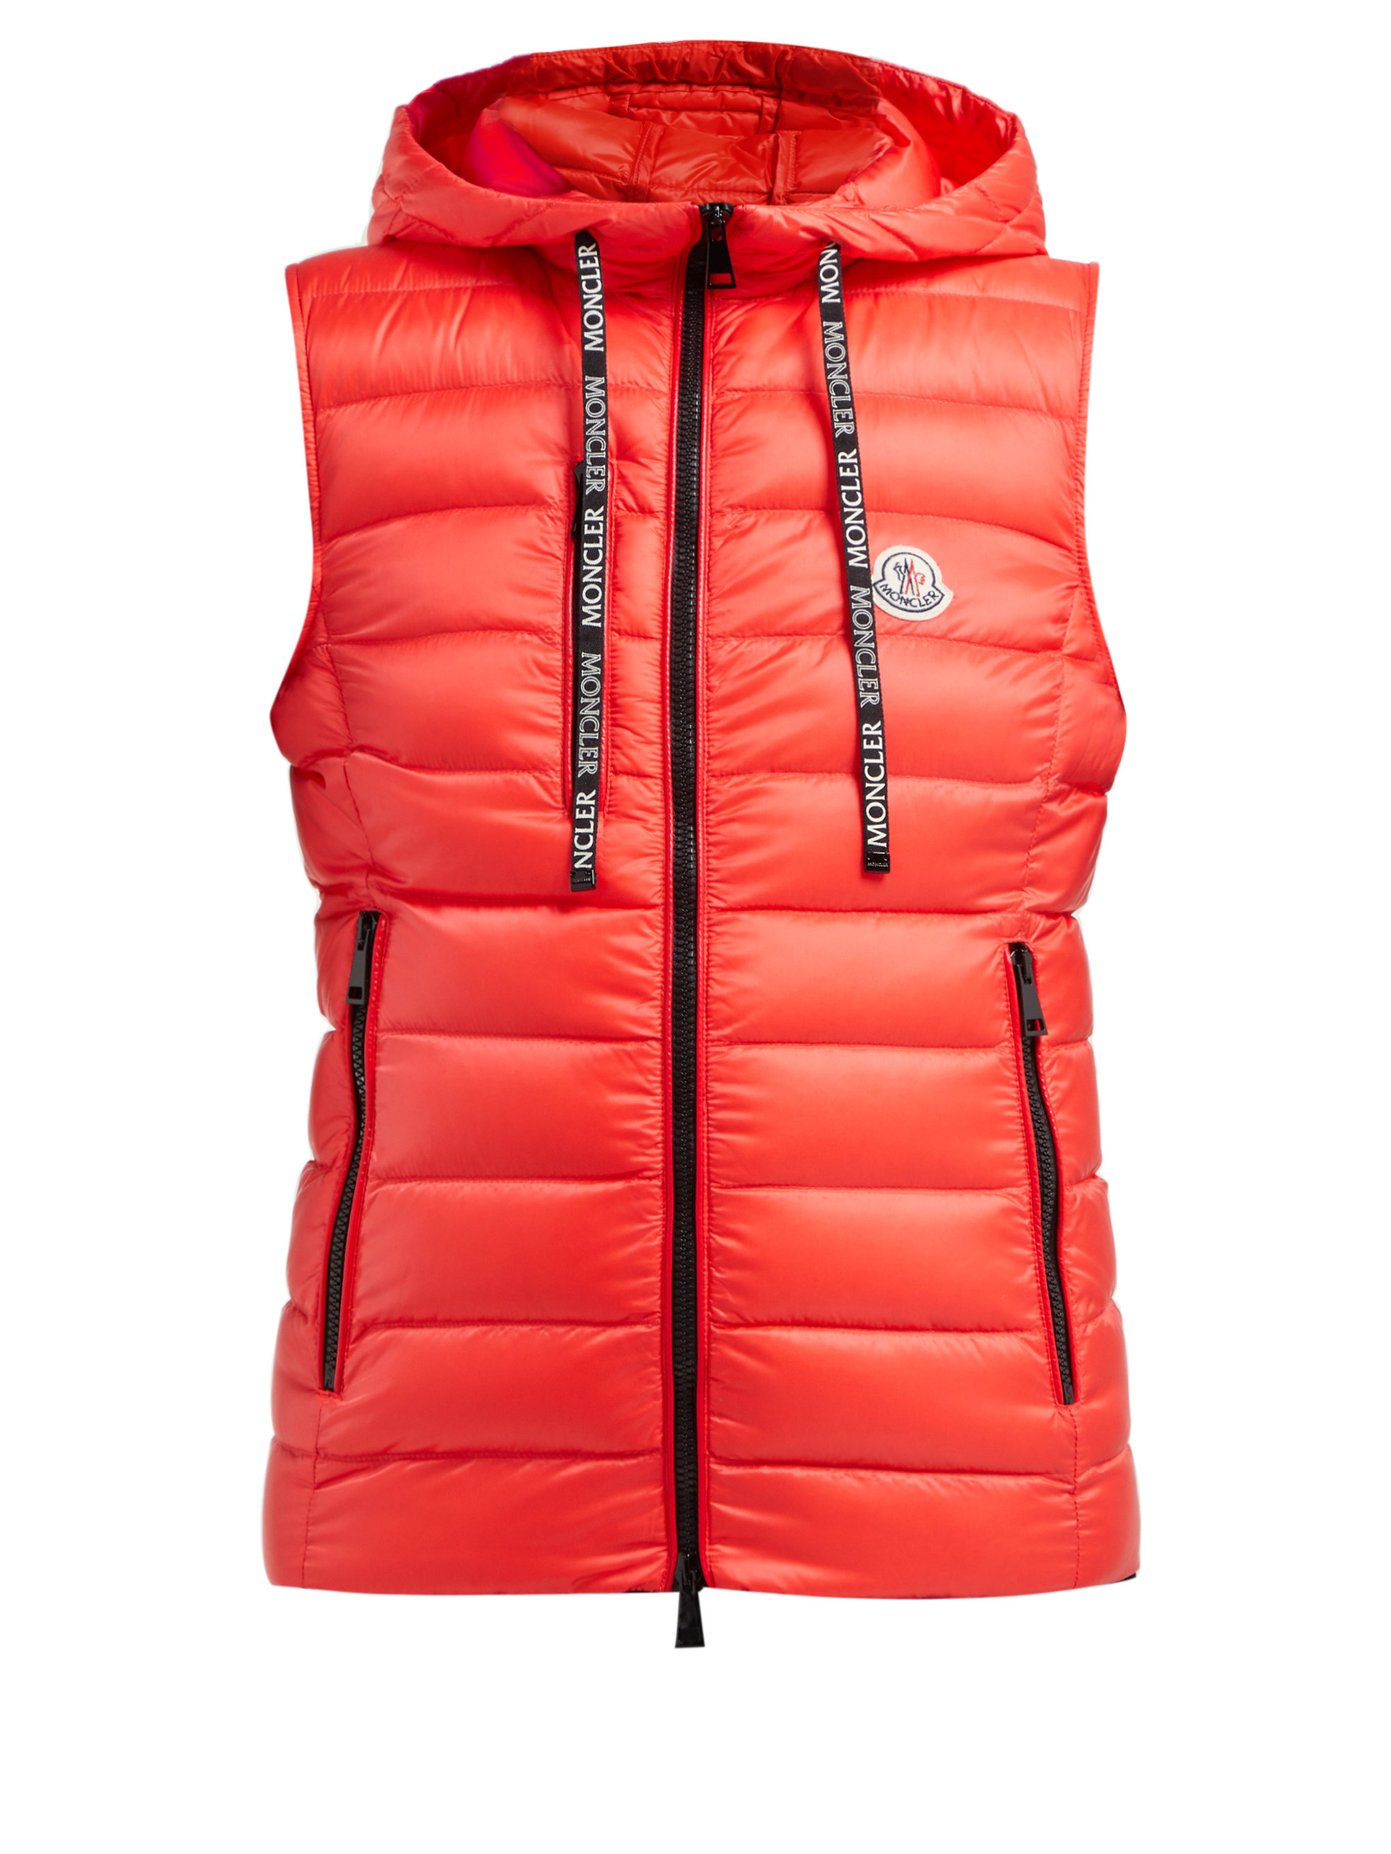 moncler red body warmer